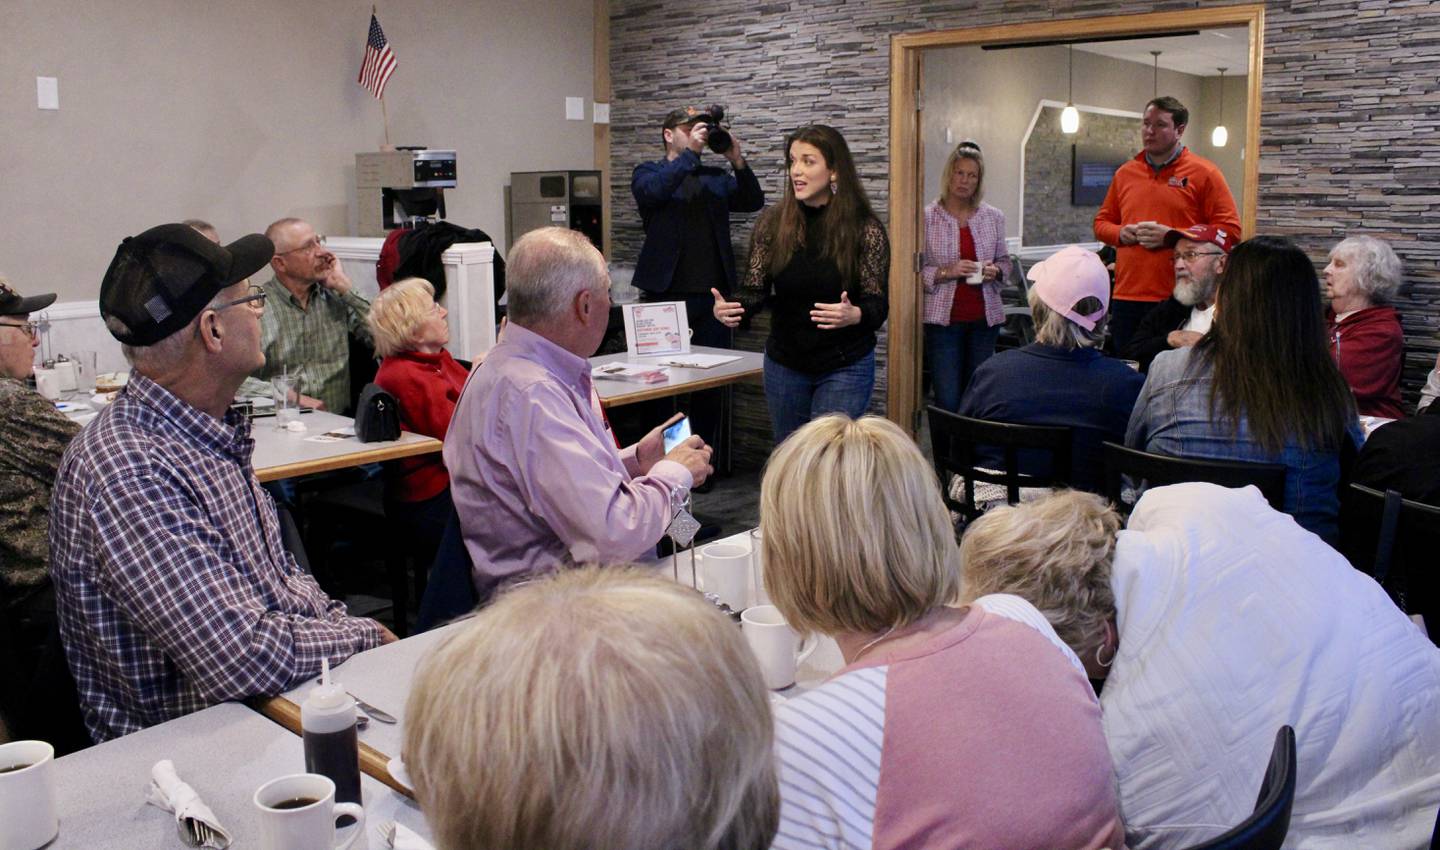 More than 50 people crowded into the A's Kitchen banquet room on Saturday morning for a meeting of the Twin City Conservatives to hear from Esther Joy King. In the doorway stand state Rep. Tony McCombie and Bradley Fritz. Both are unopposed in their respective statehouse races.